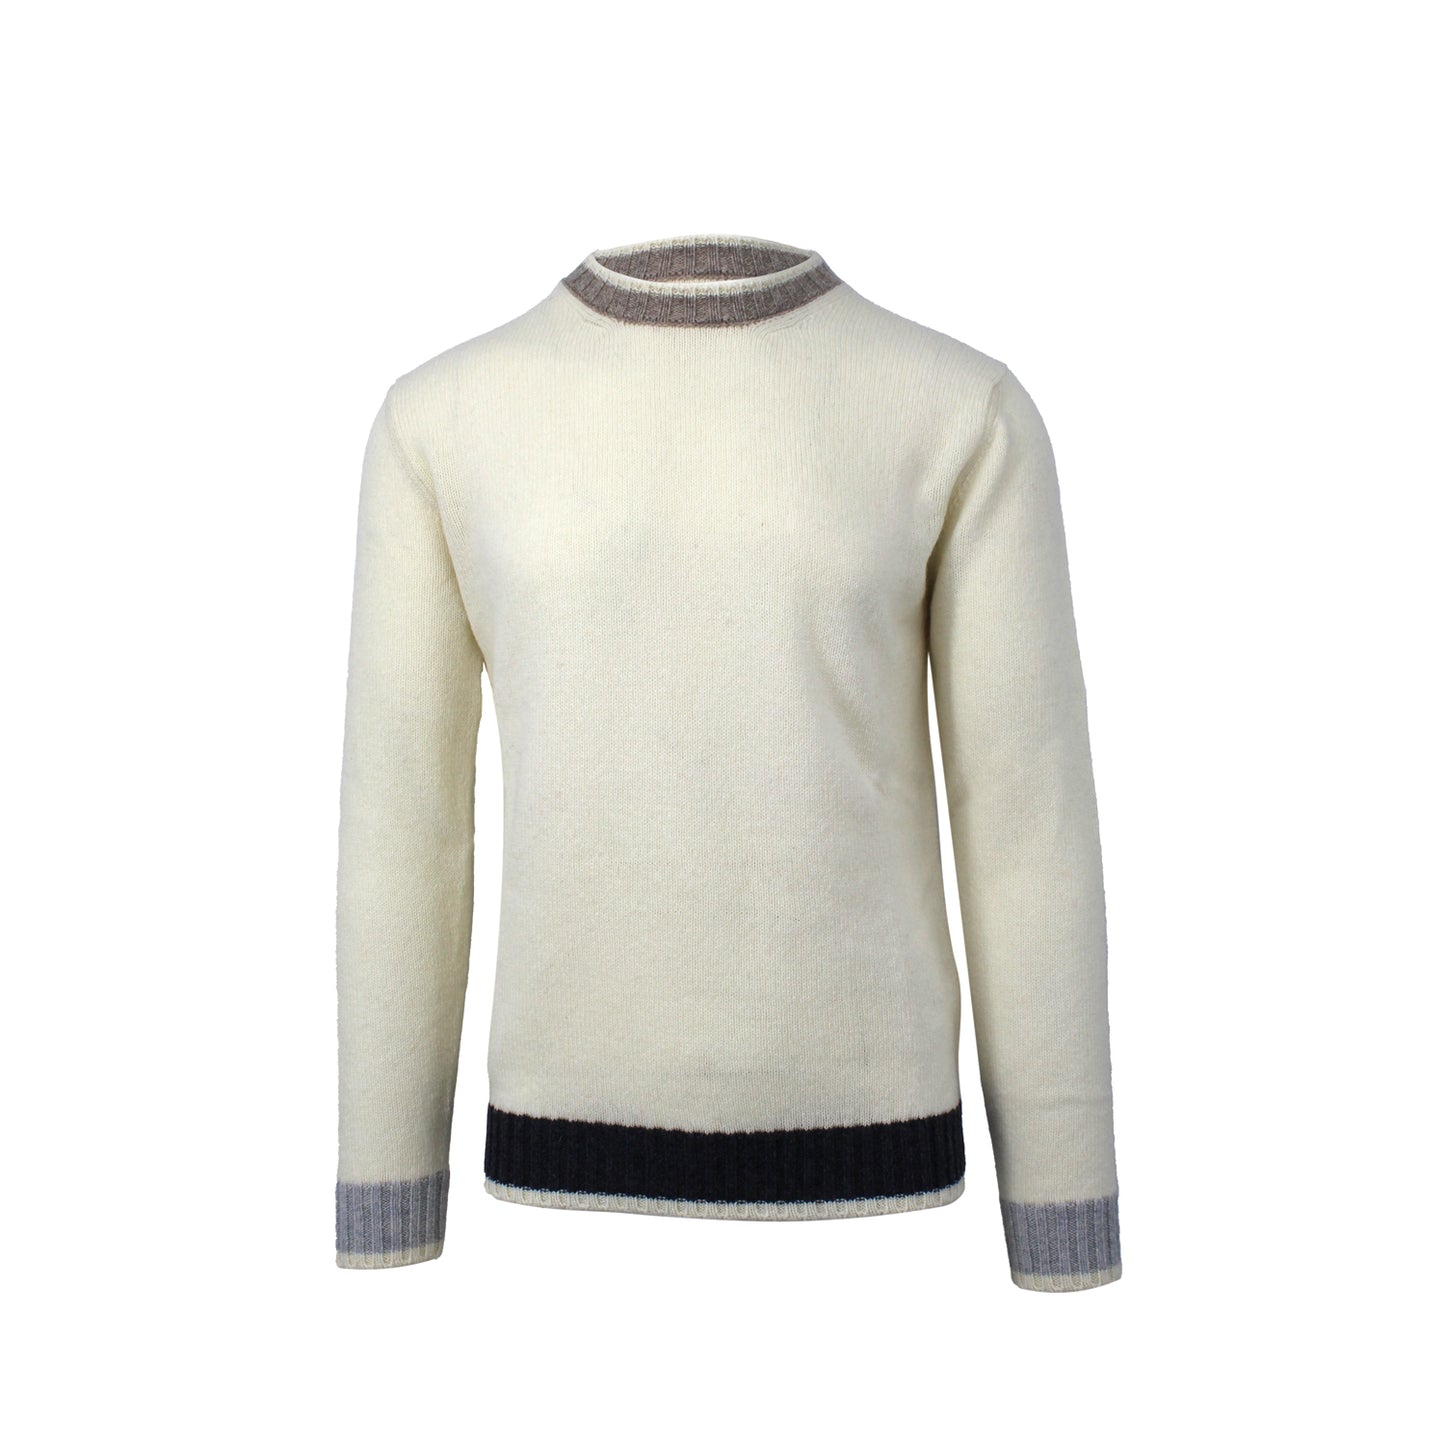 Creme Crewneck Sweater with Contrast Accents